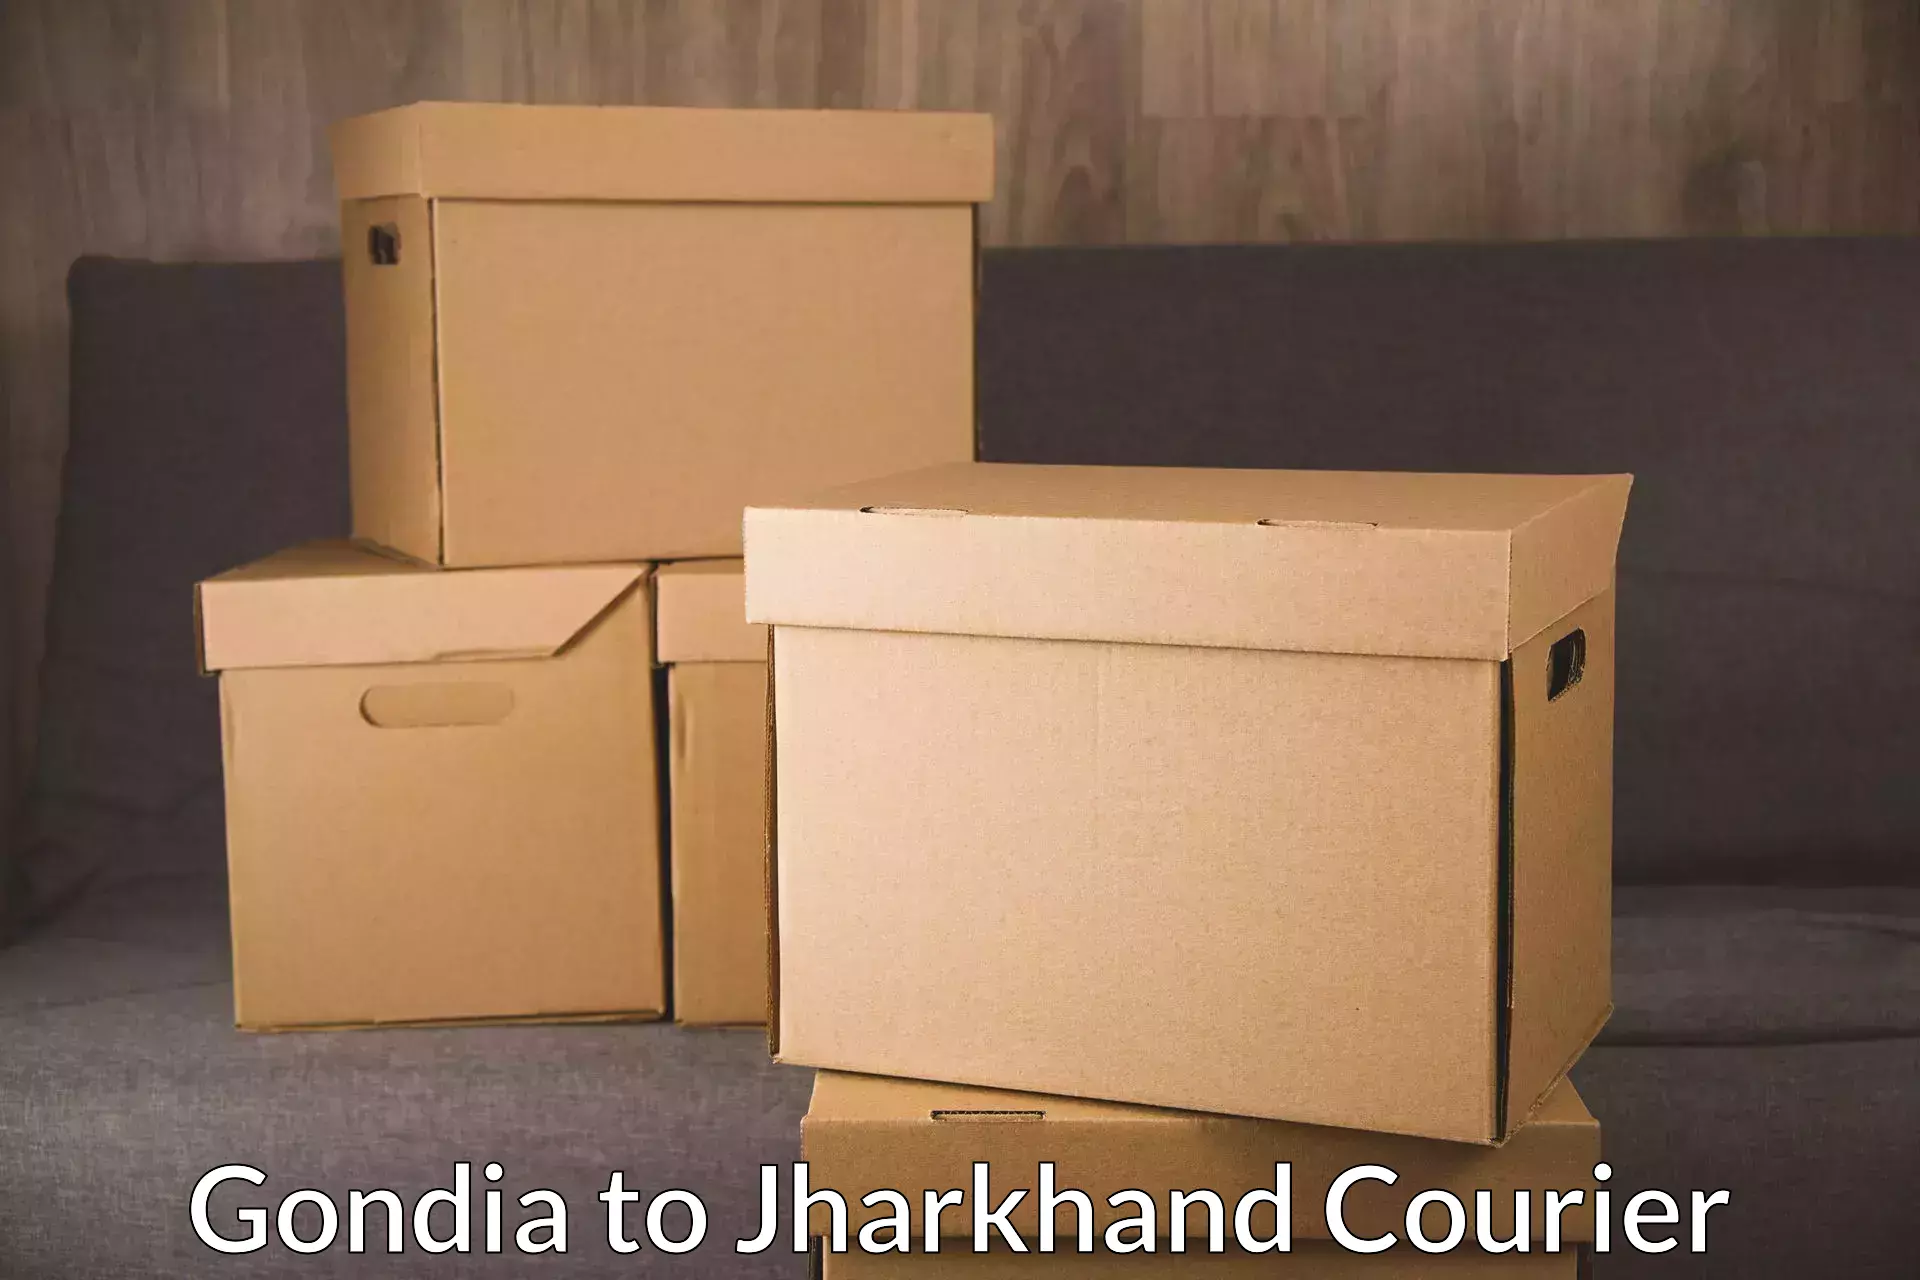 Urban courier service Gondia to Jamshedpur